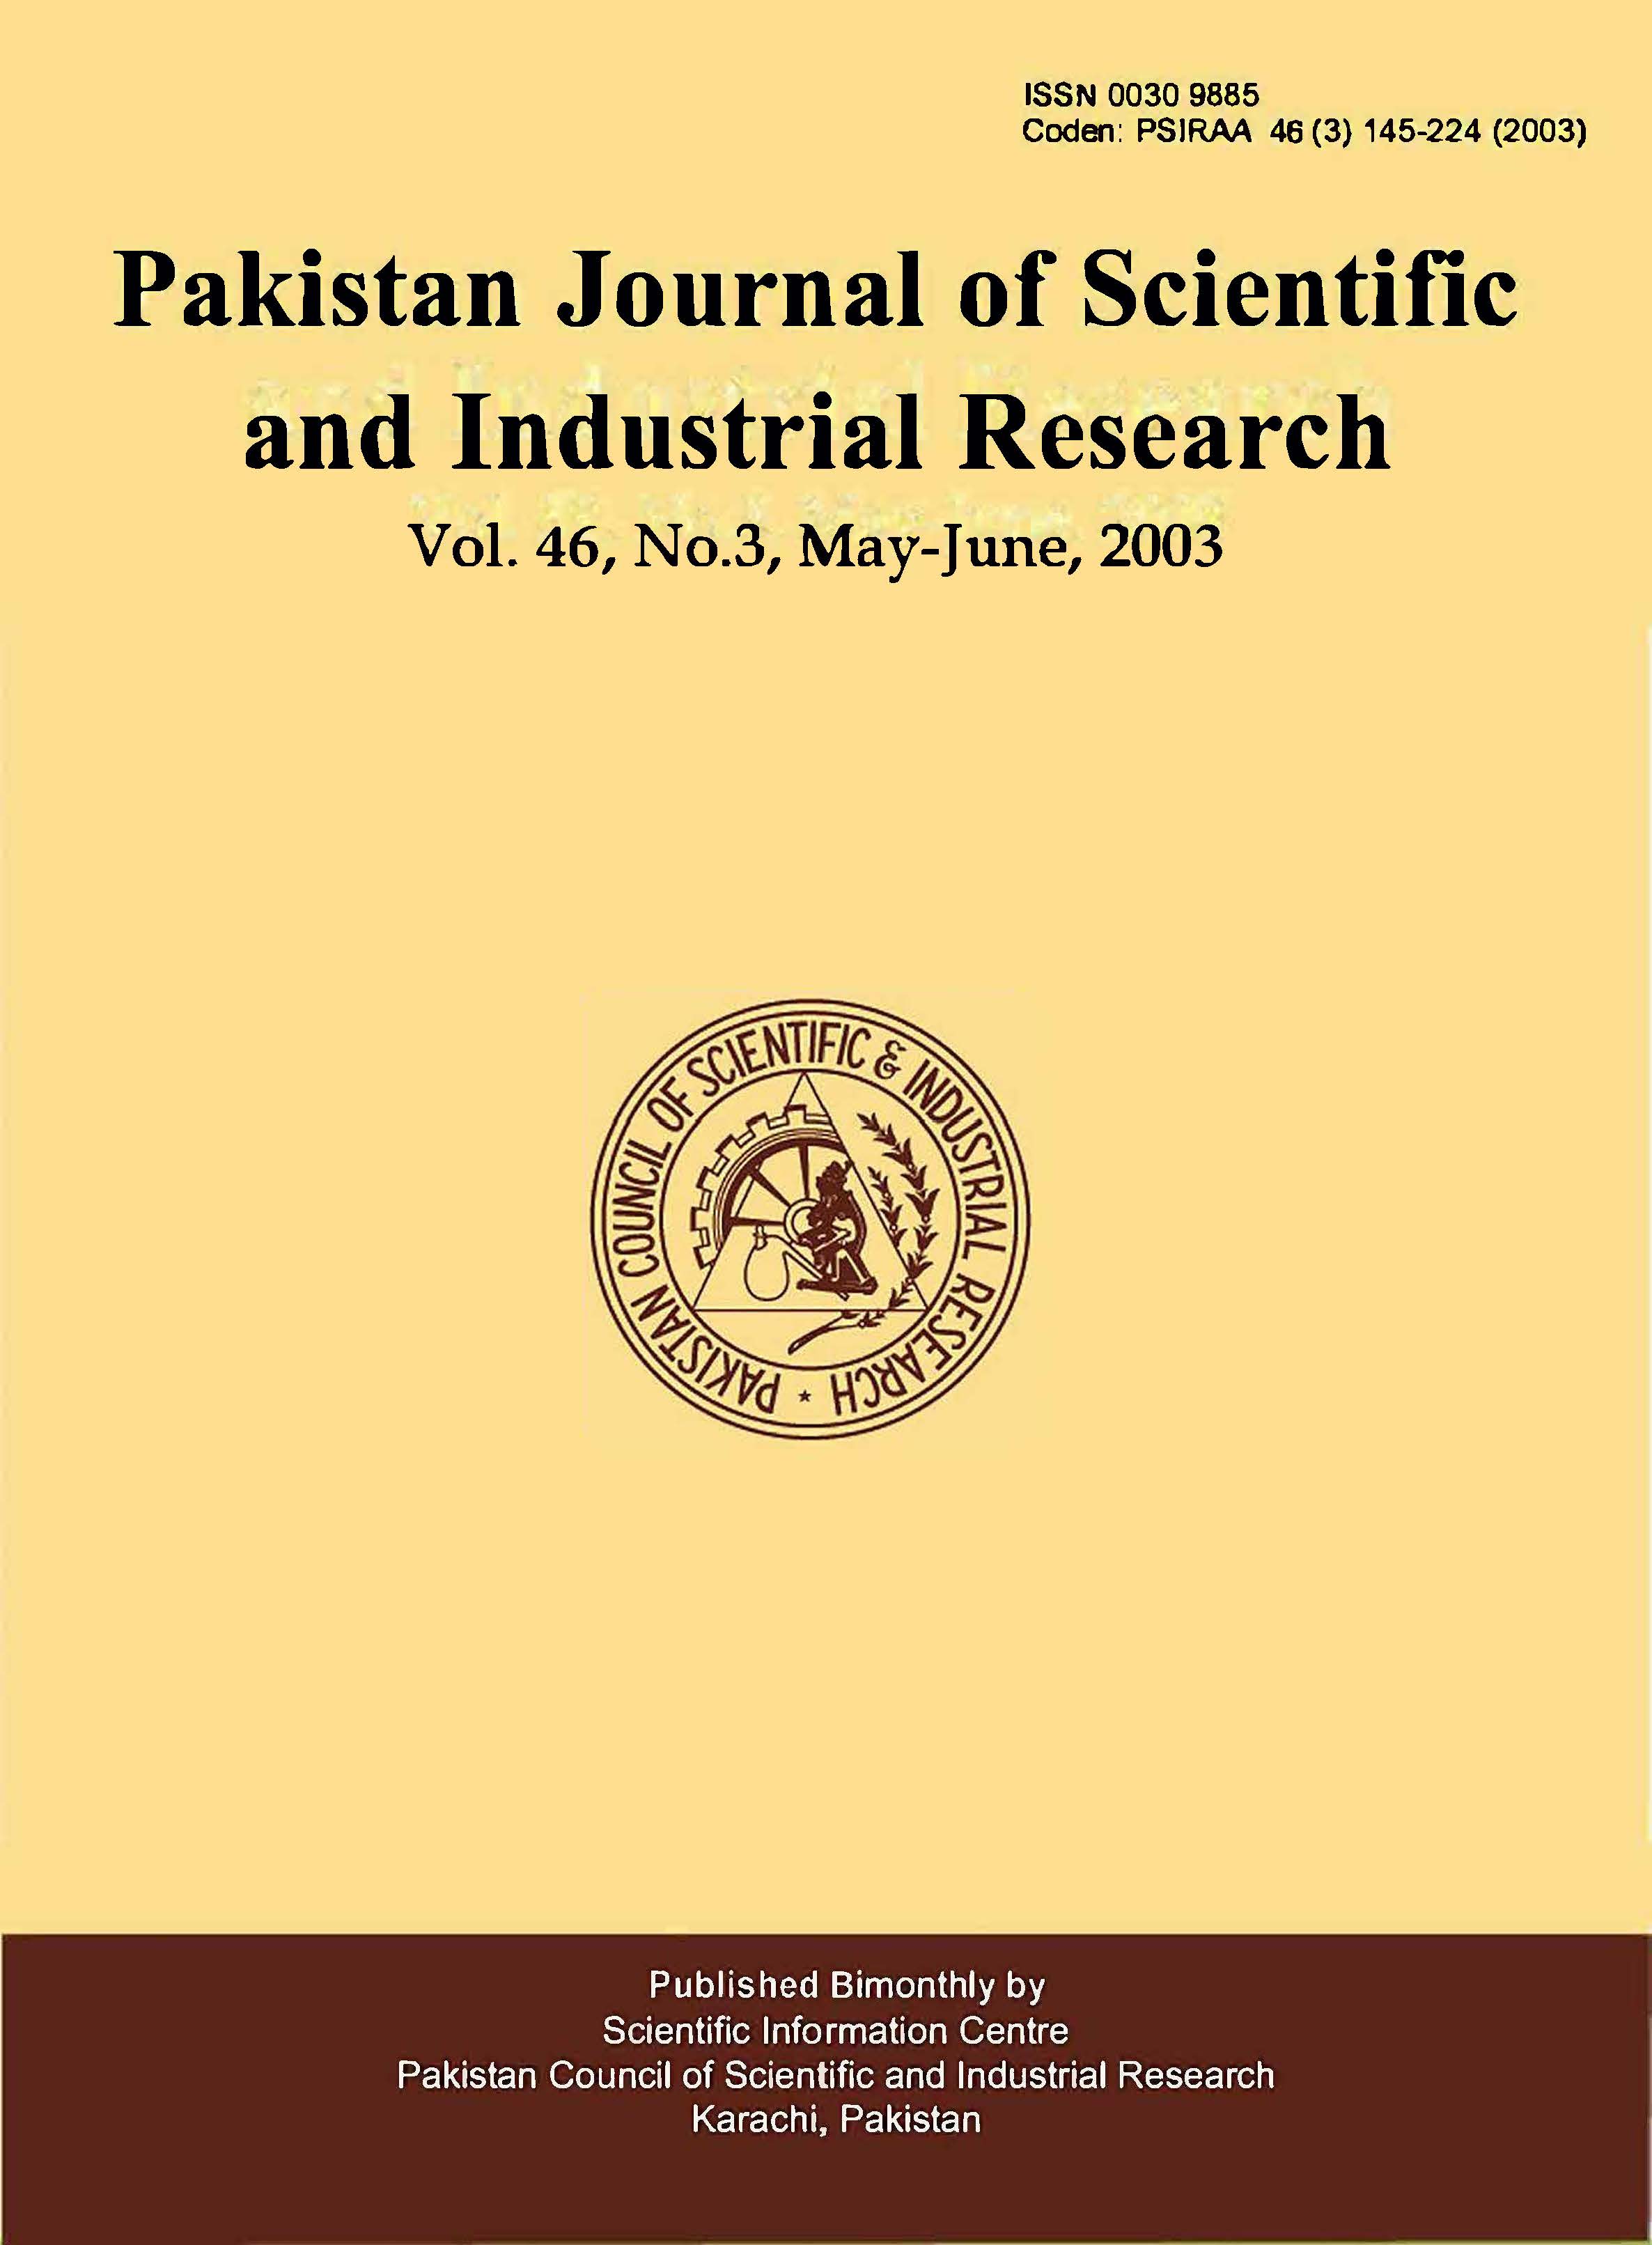 					View Vol. 46 No. 3 (2003): Pakistan Journal of Scientific and Industrial Research
				